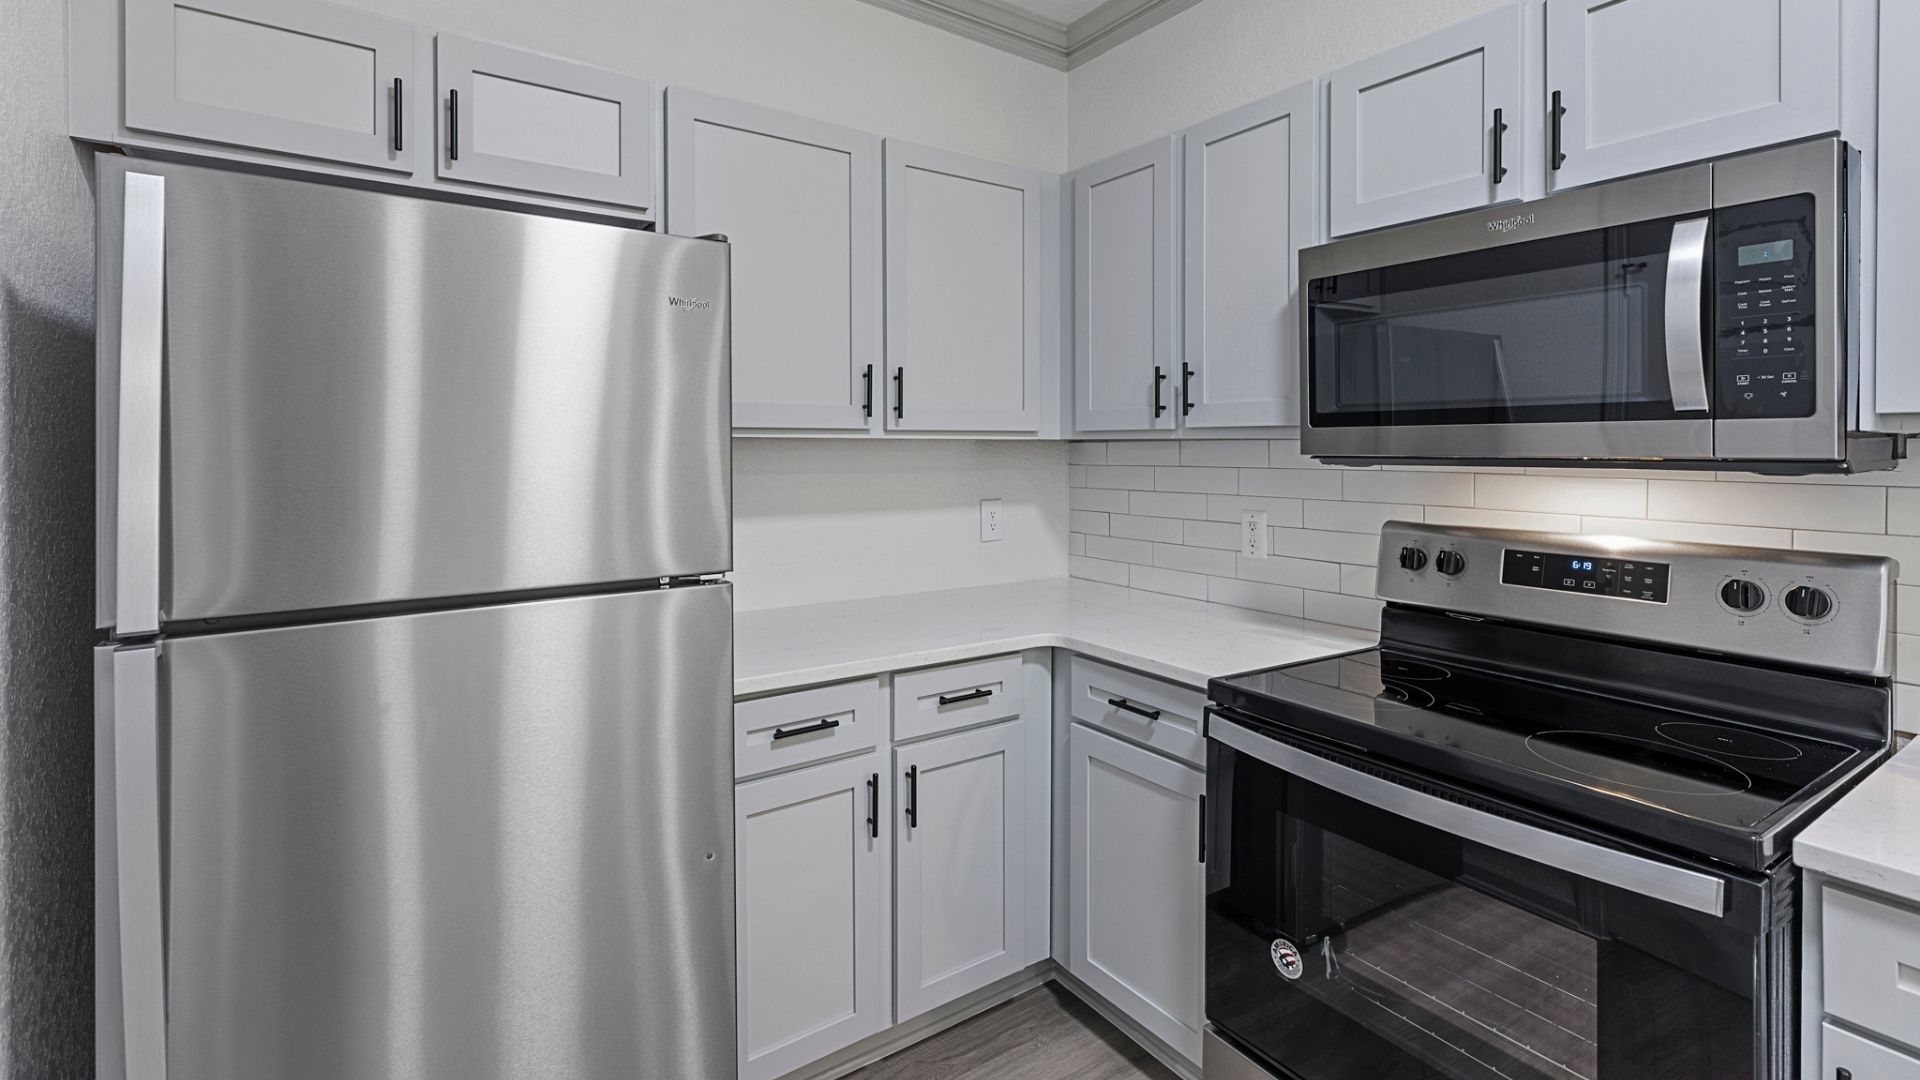 Renovated Kitchen with Quartz countertops, stainless steel appliances, and black hardware